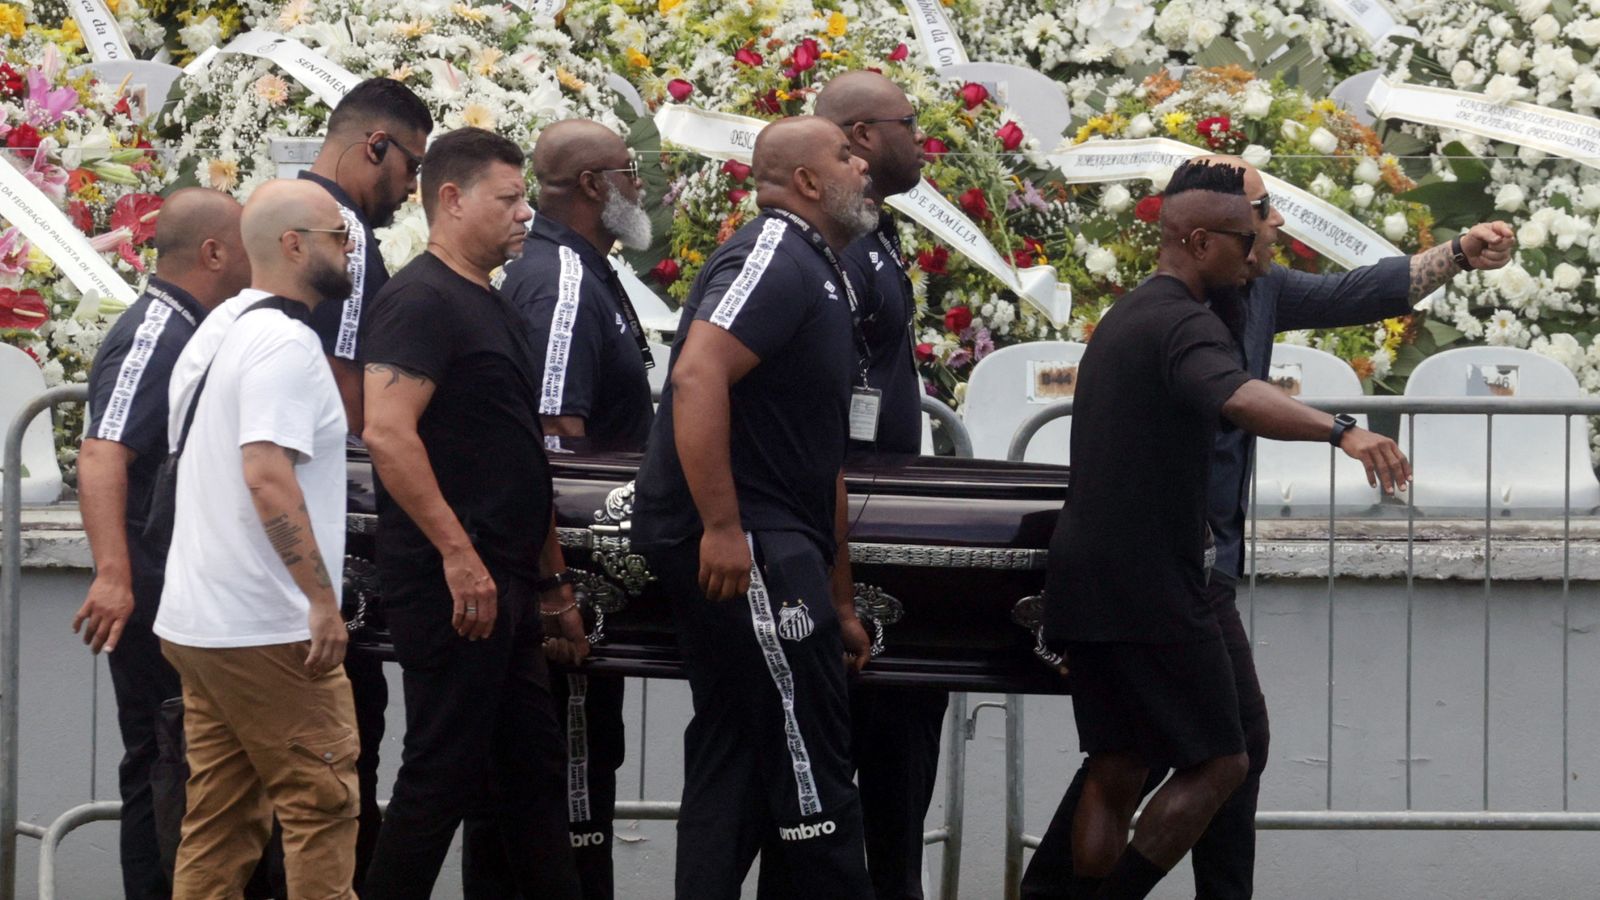 Pele Funeral: Last farewell to the great Pele, body kept in the stadium of Santos Club, see photos here